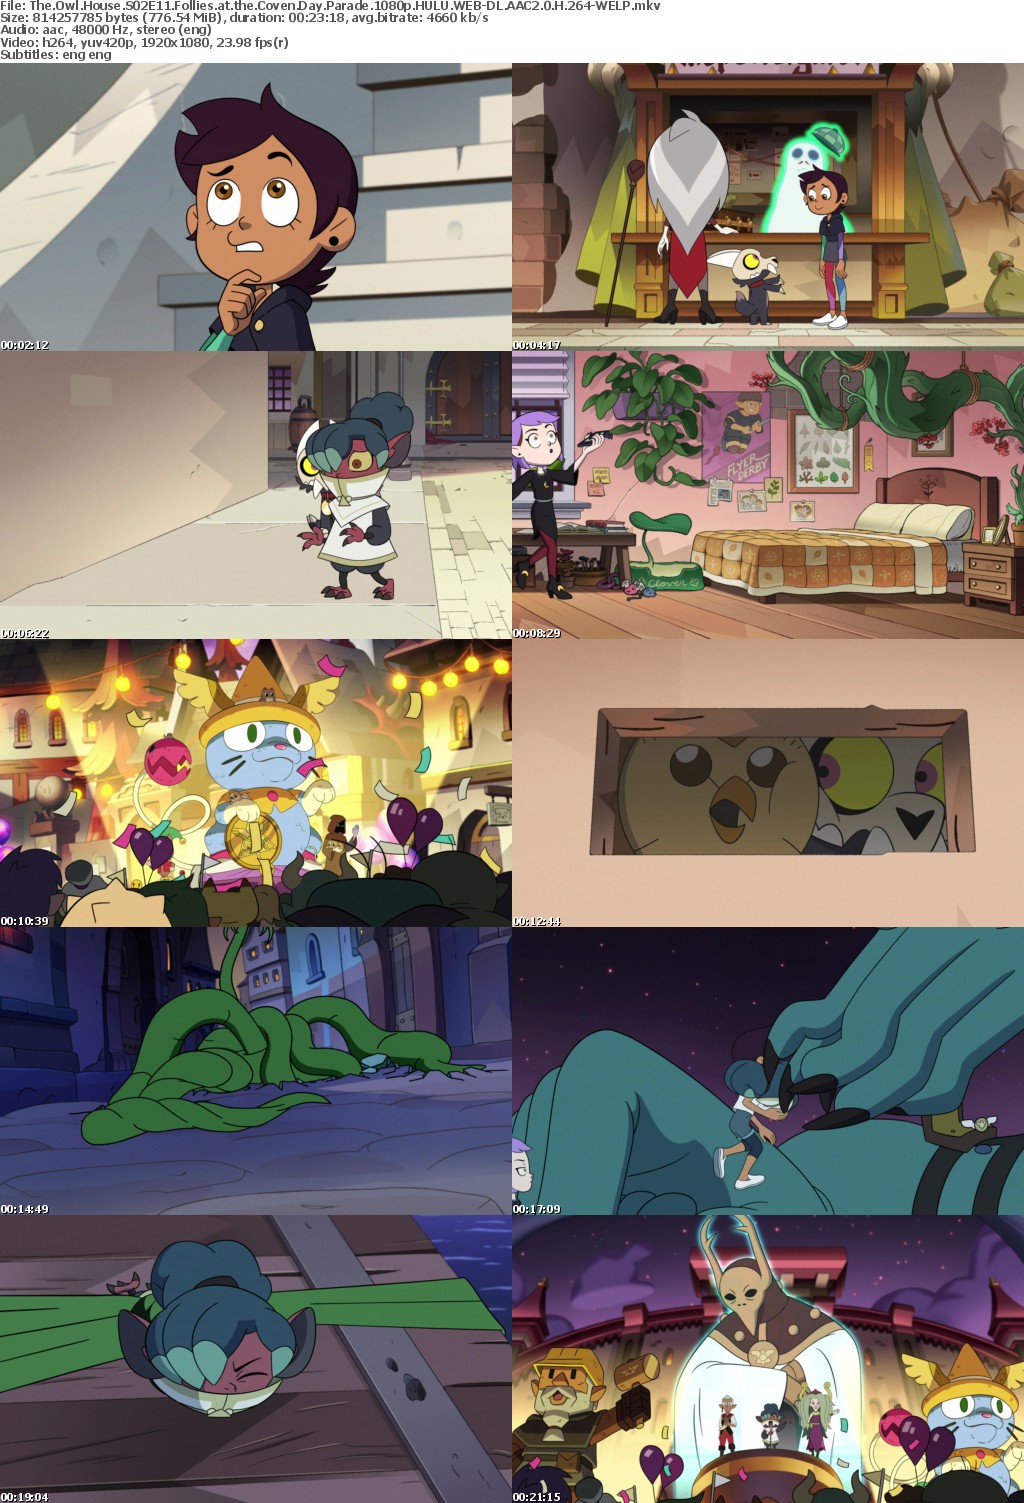 The Owl House S02E11 Follies at the Coven Day Parade 1080p HULU WEB-DL AAC2 0 H 264-WELP